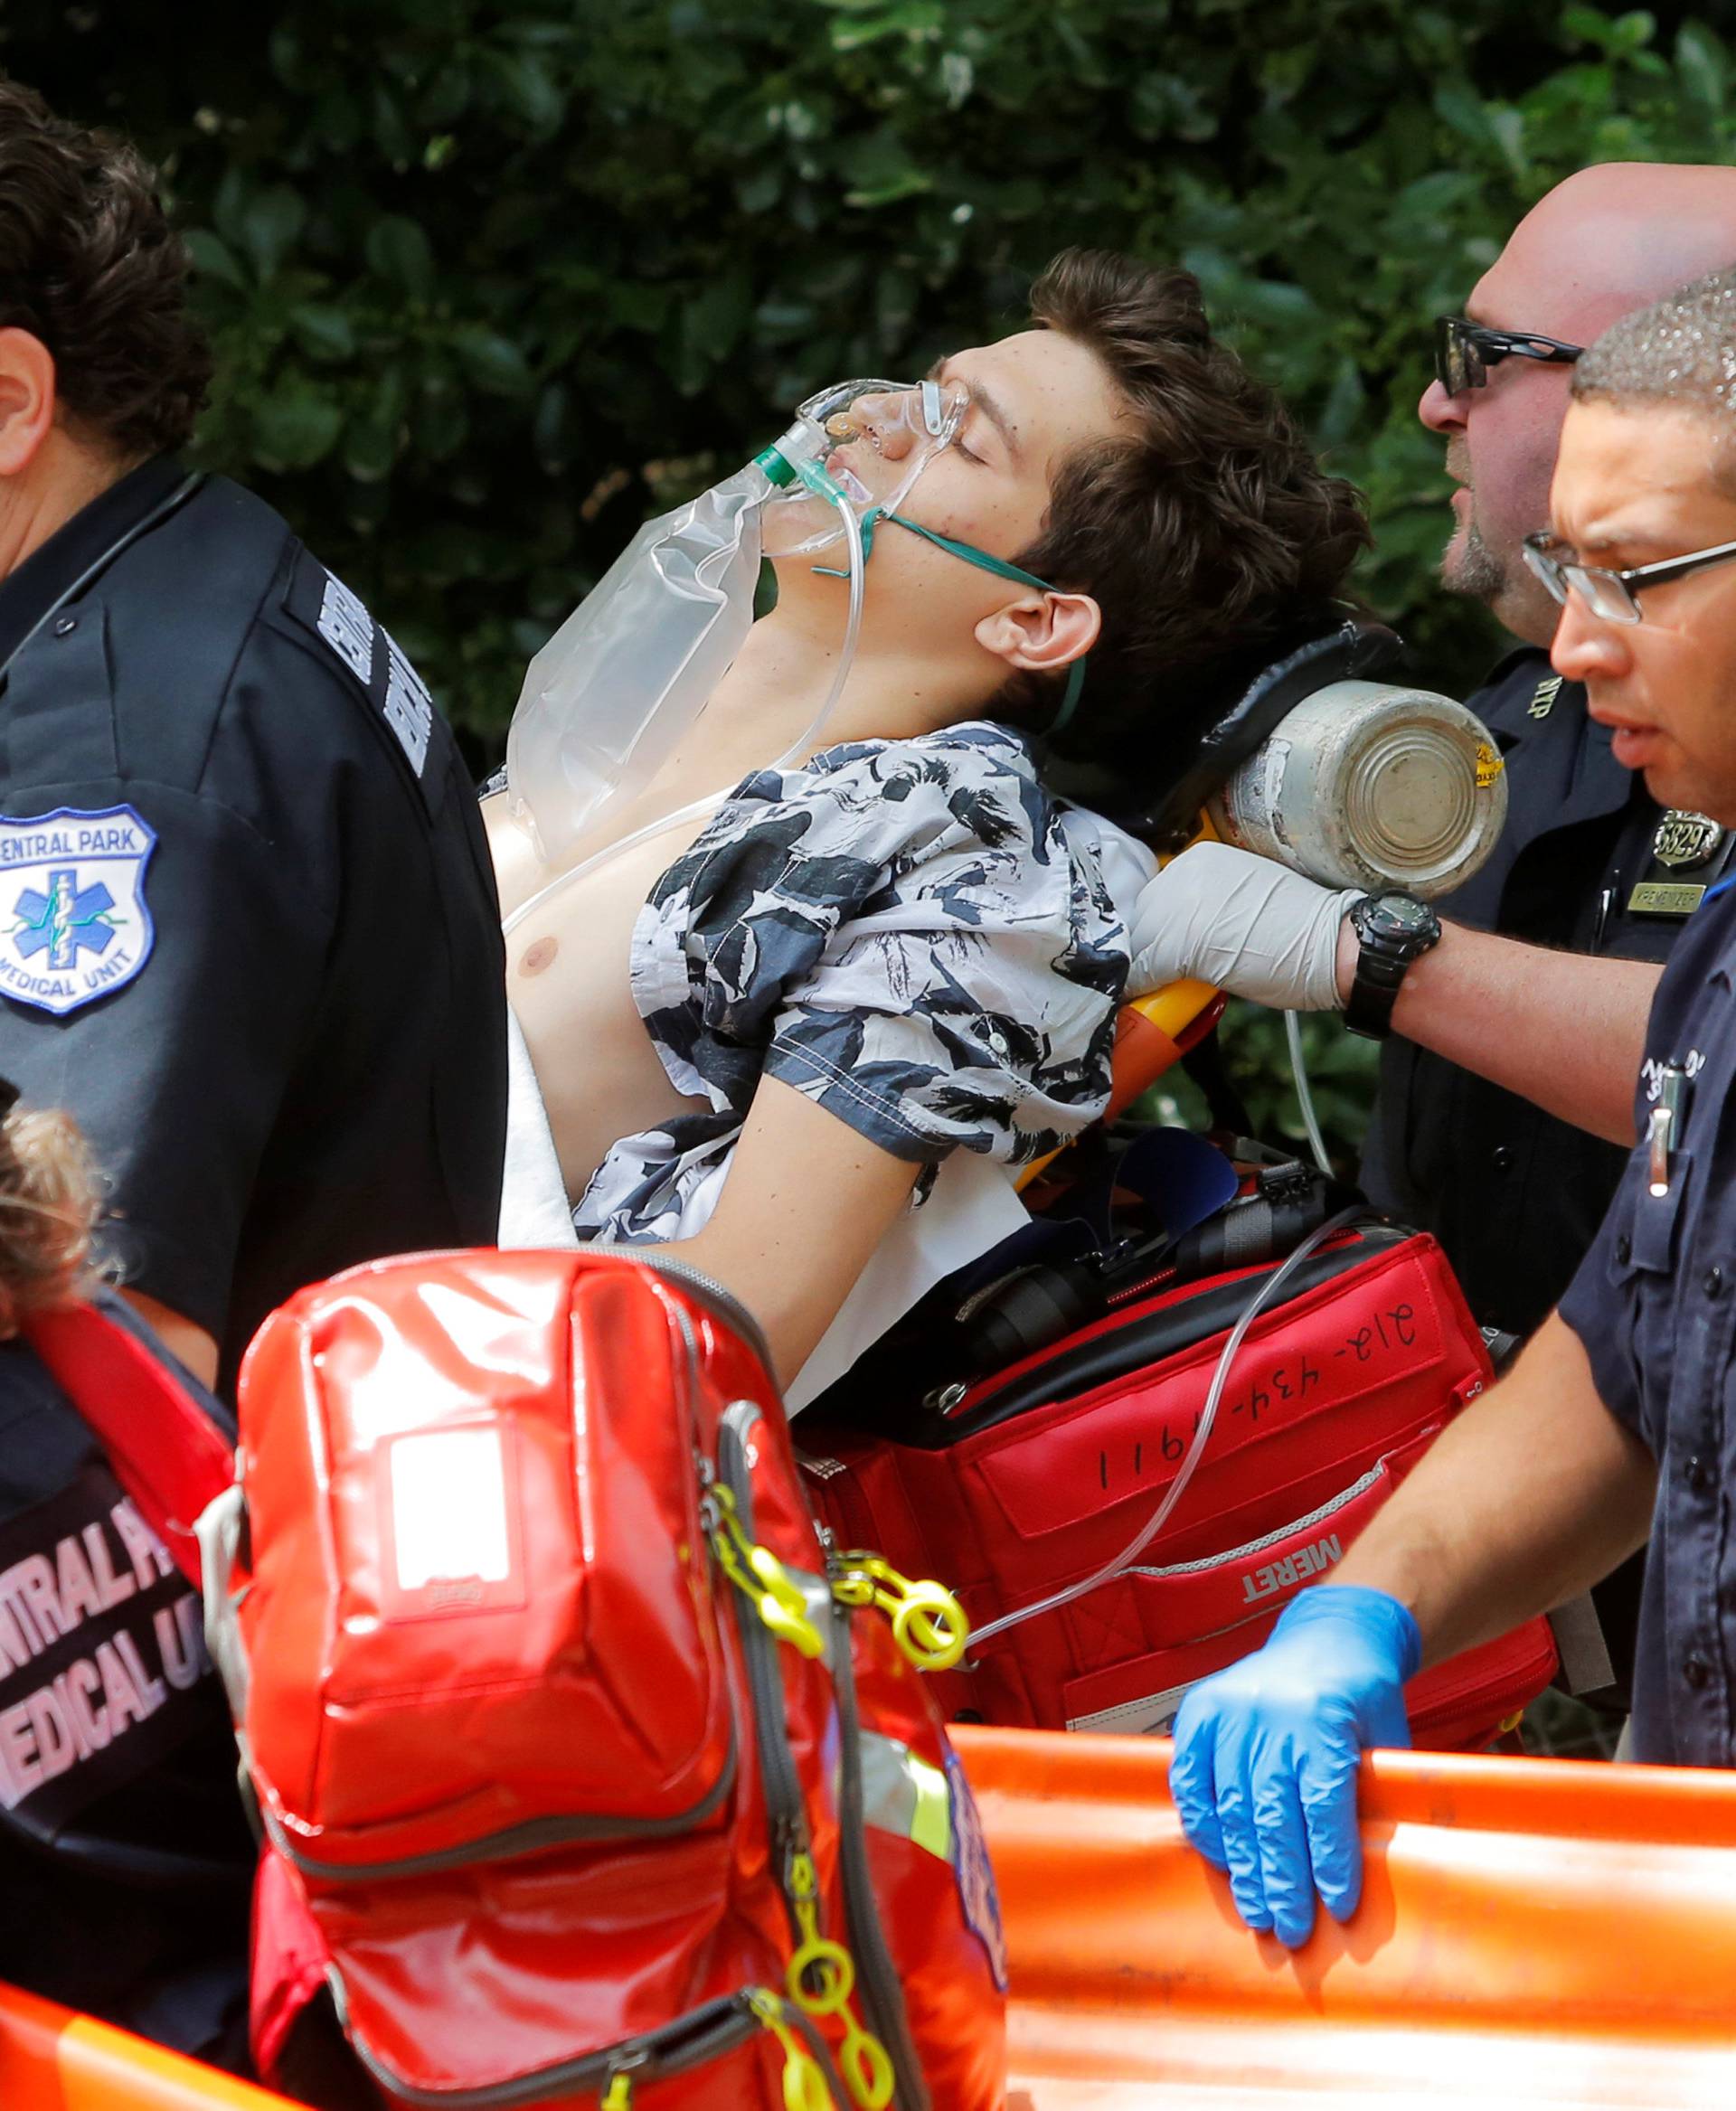 Medics remove a man who was injured after an explosion in Central Park in Manhattan, New York, U.S.